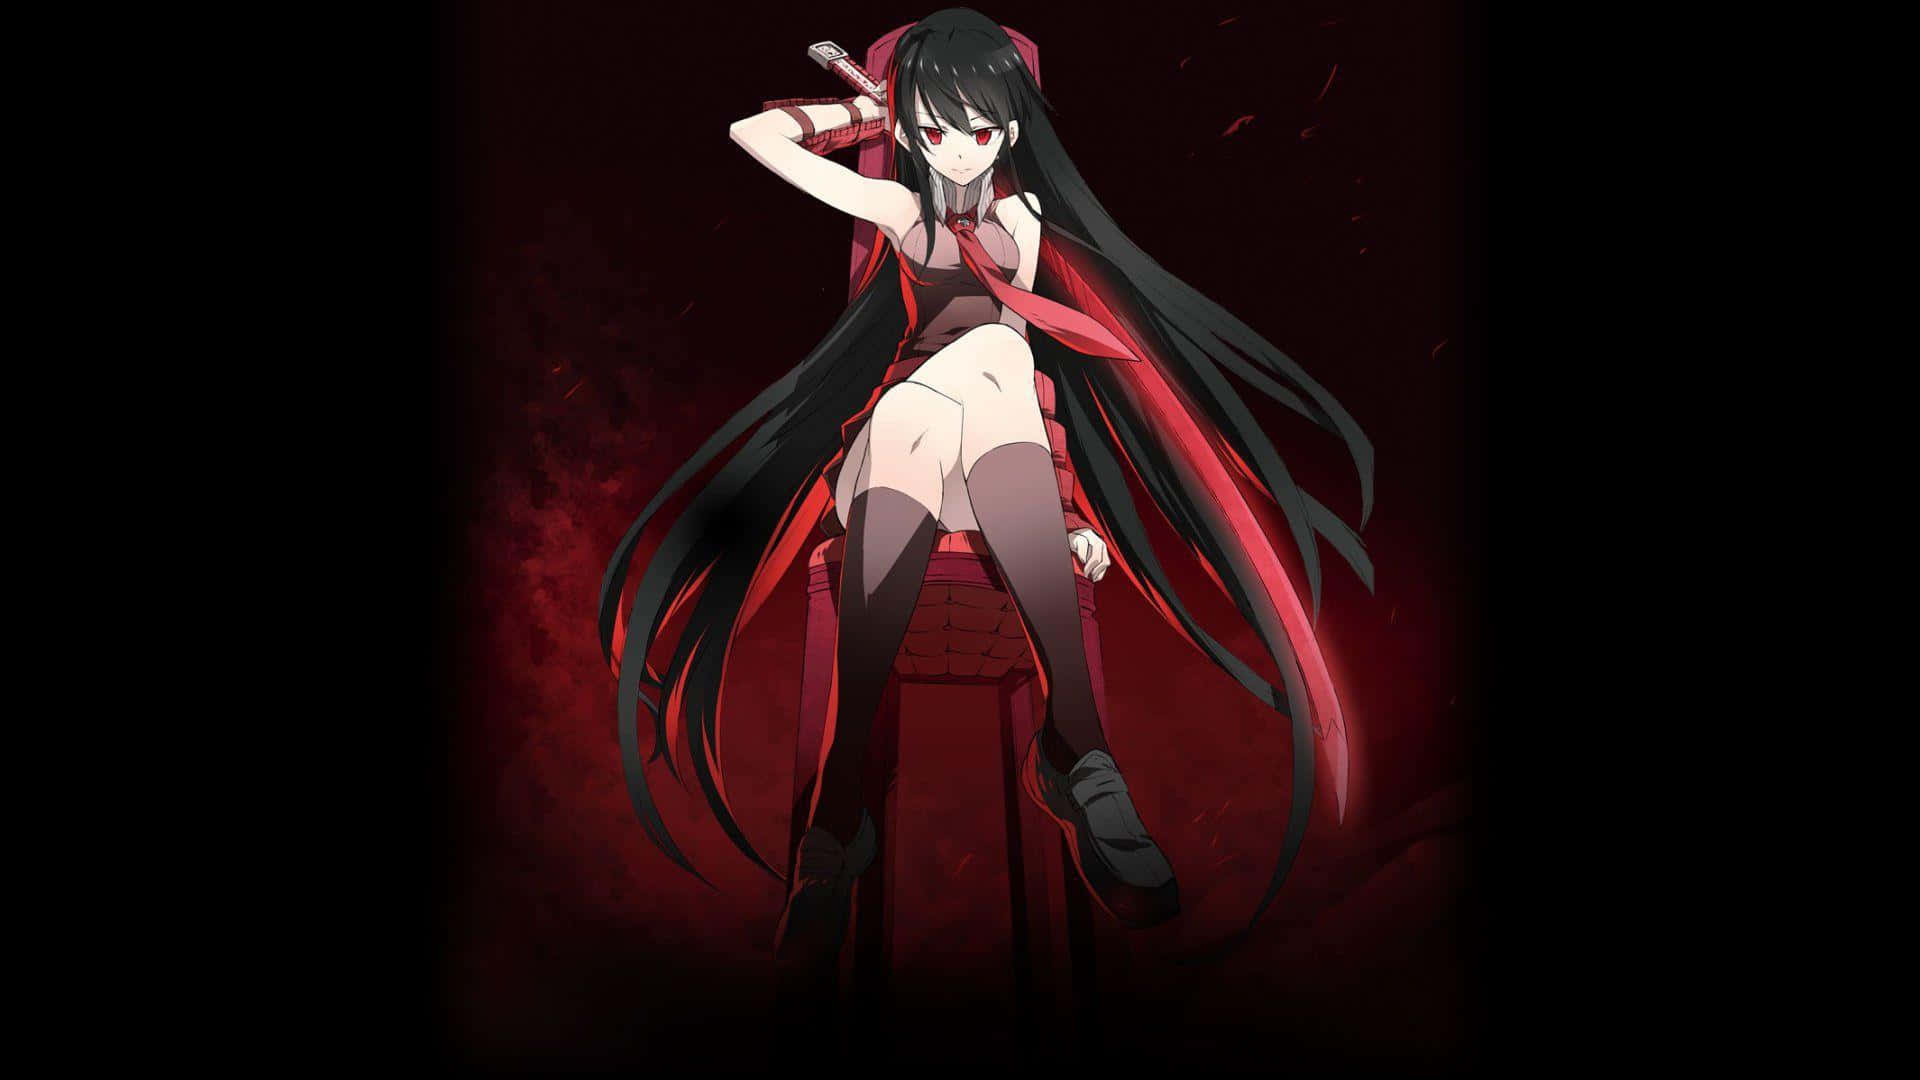 Get ready for the epic battle between the Night Raid and the Jaegers in Akame Ga Kill